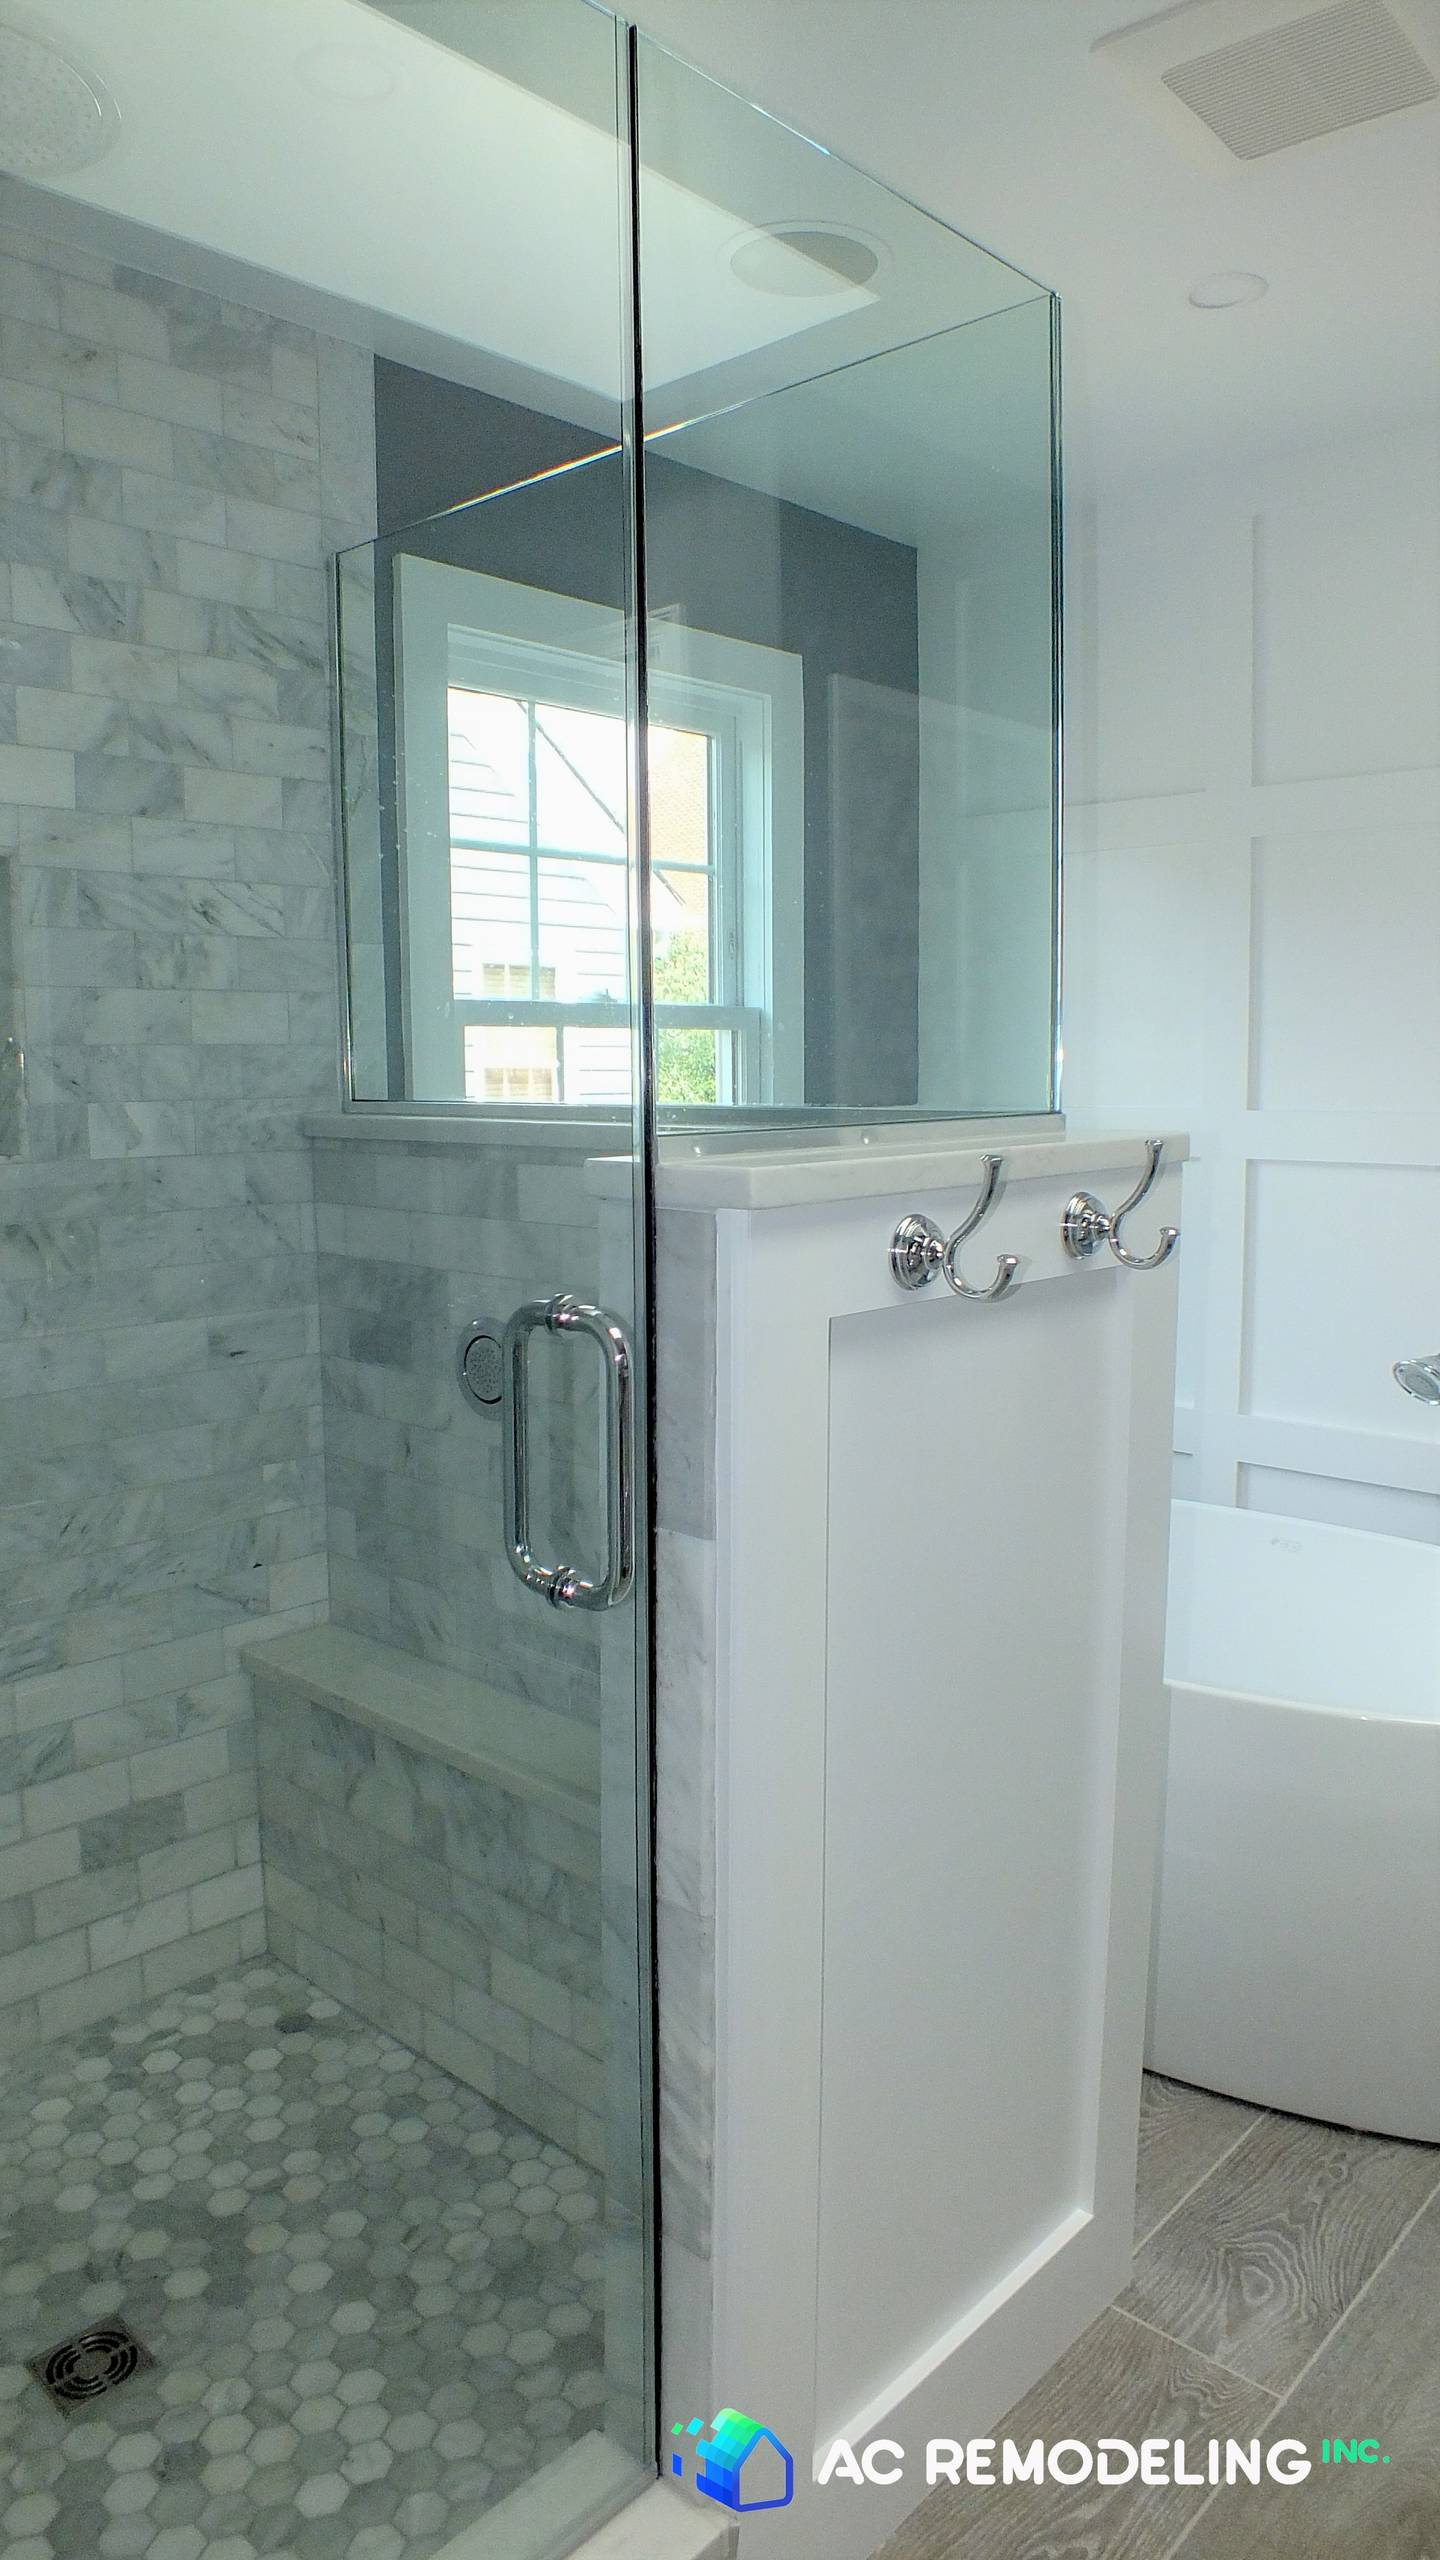 Walk-in shower and freestanding tub.